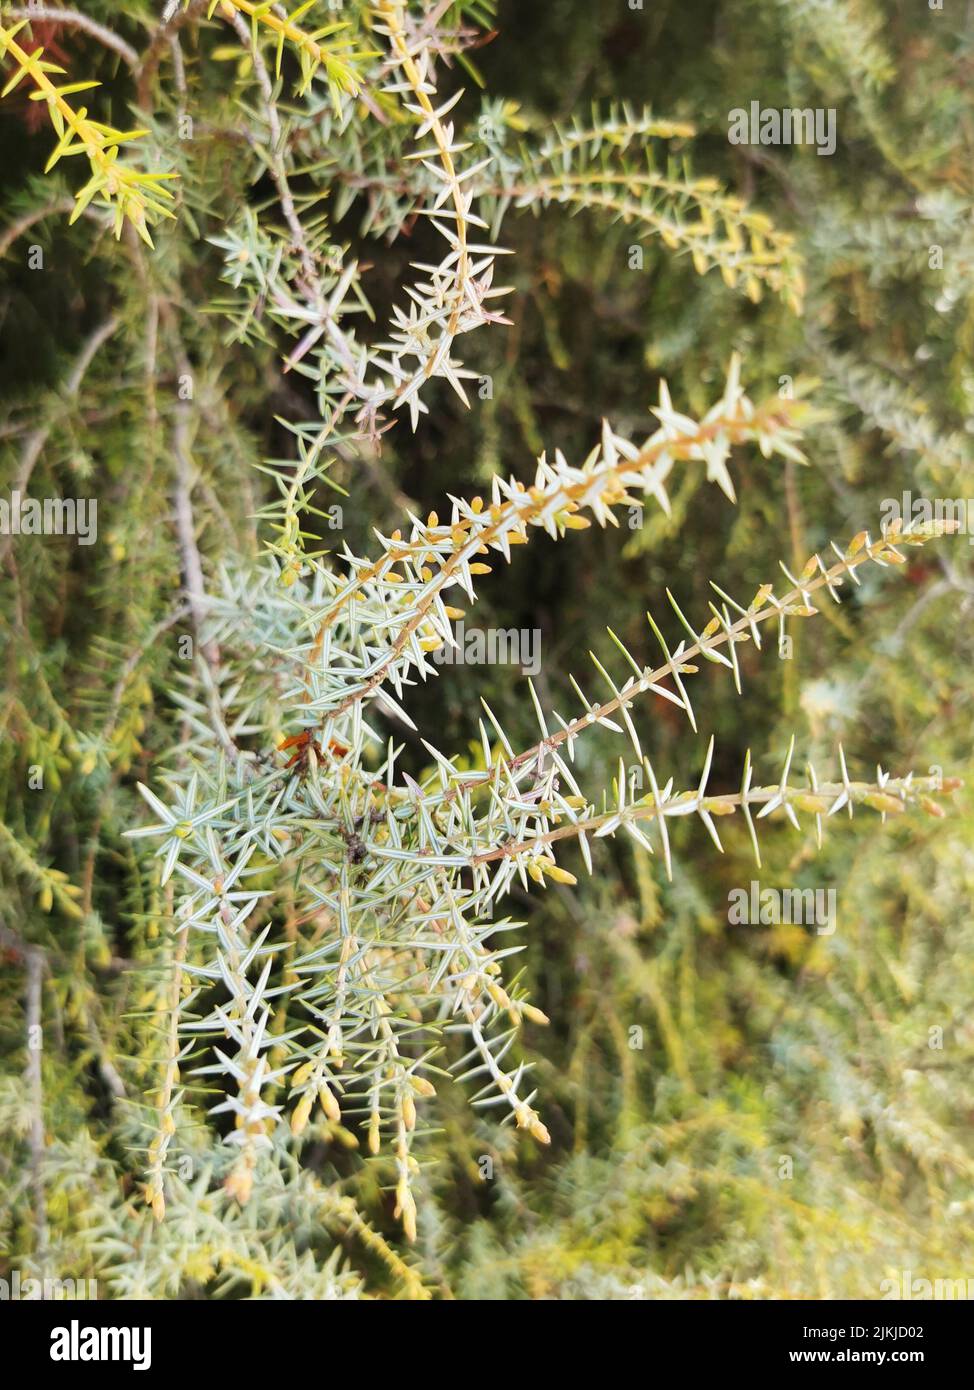 A vertical shot of a plant Stock Photo